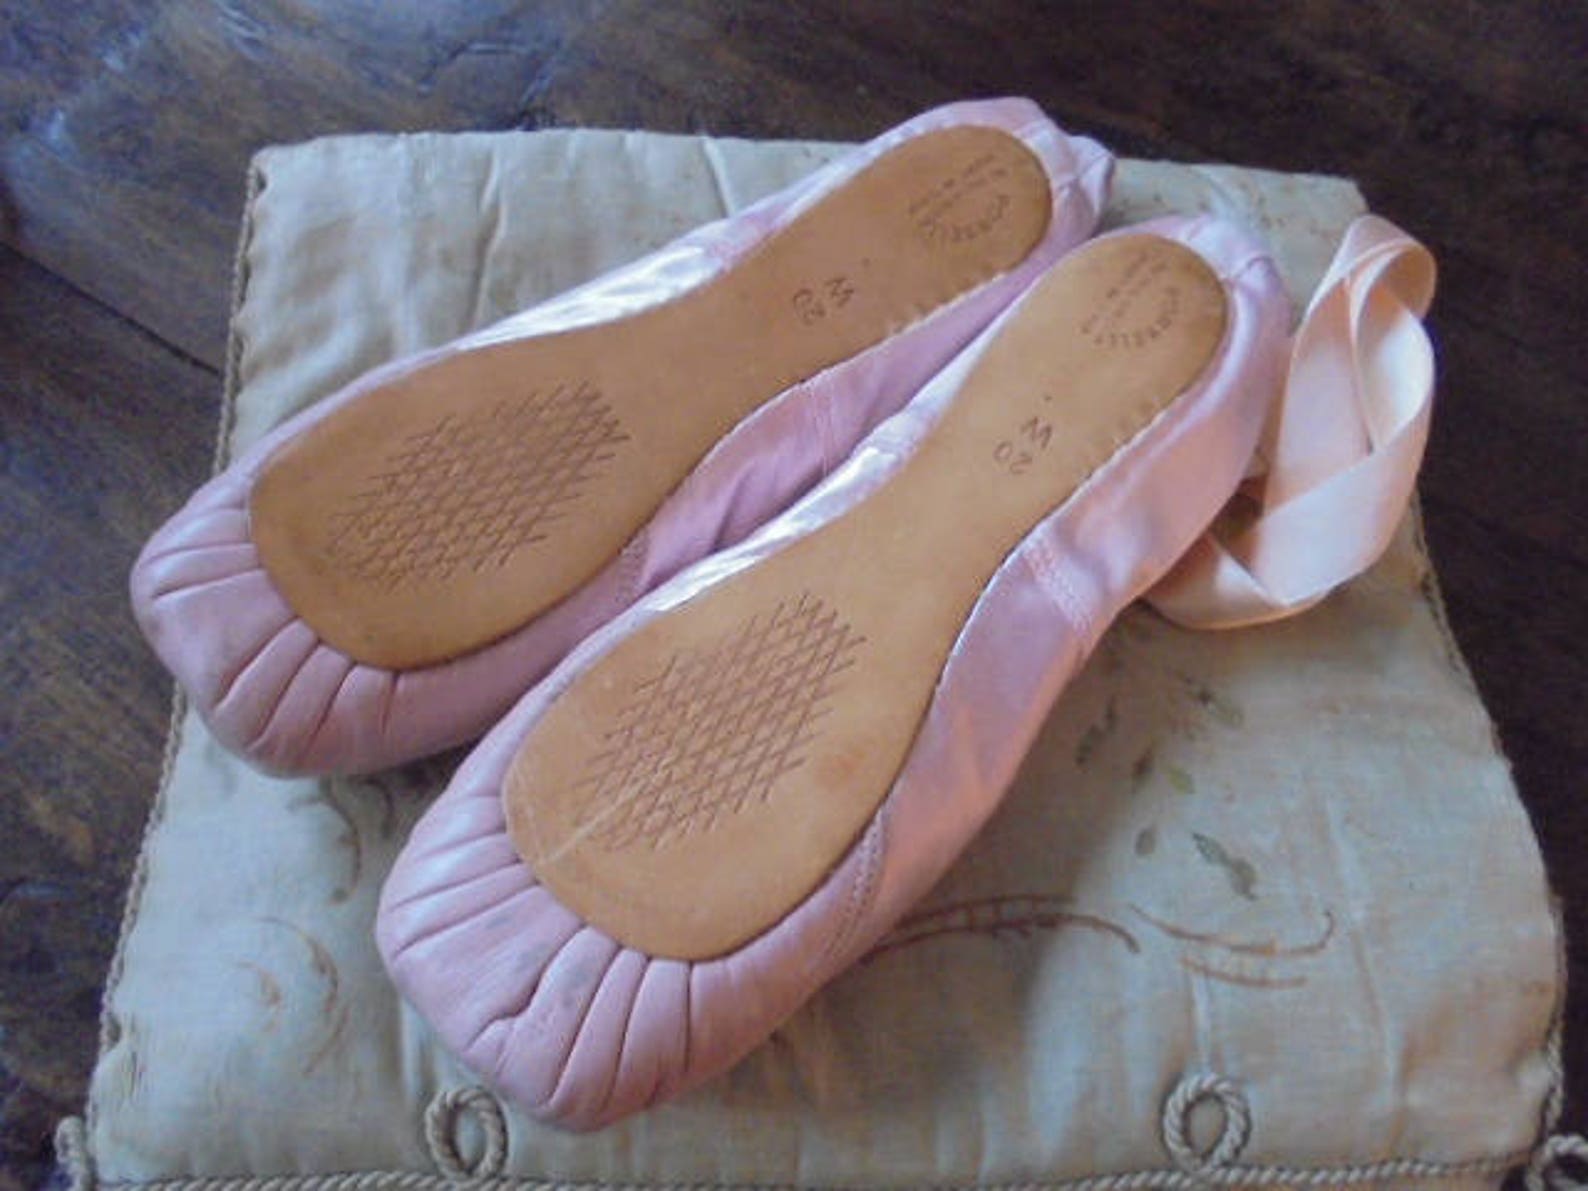 charming italian professional ballet shoes/ballet shoes/point shoes with hard nose/pink shoes of porselli design shoes